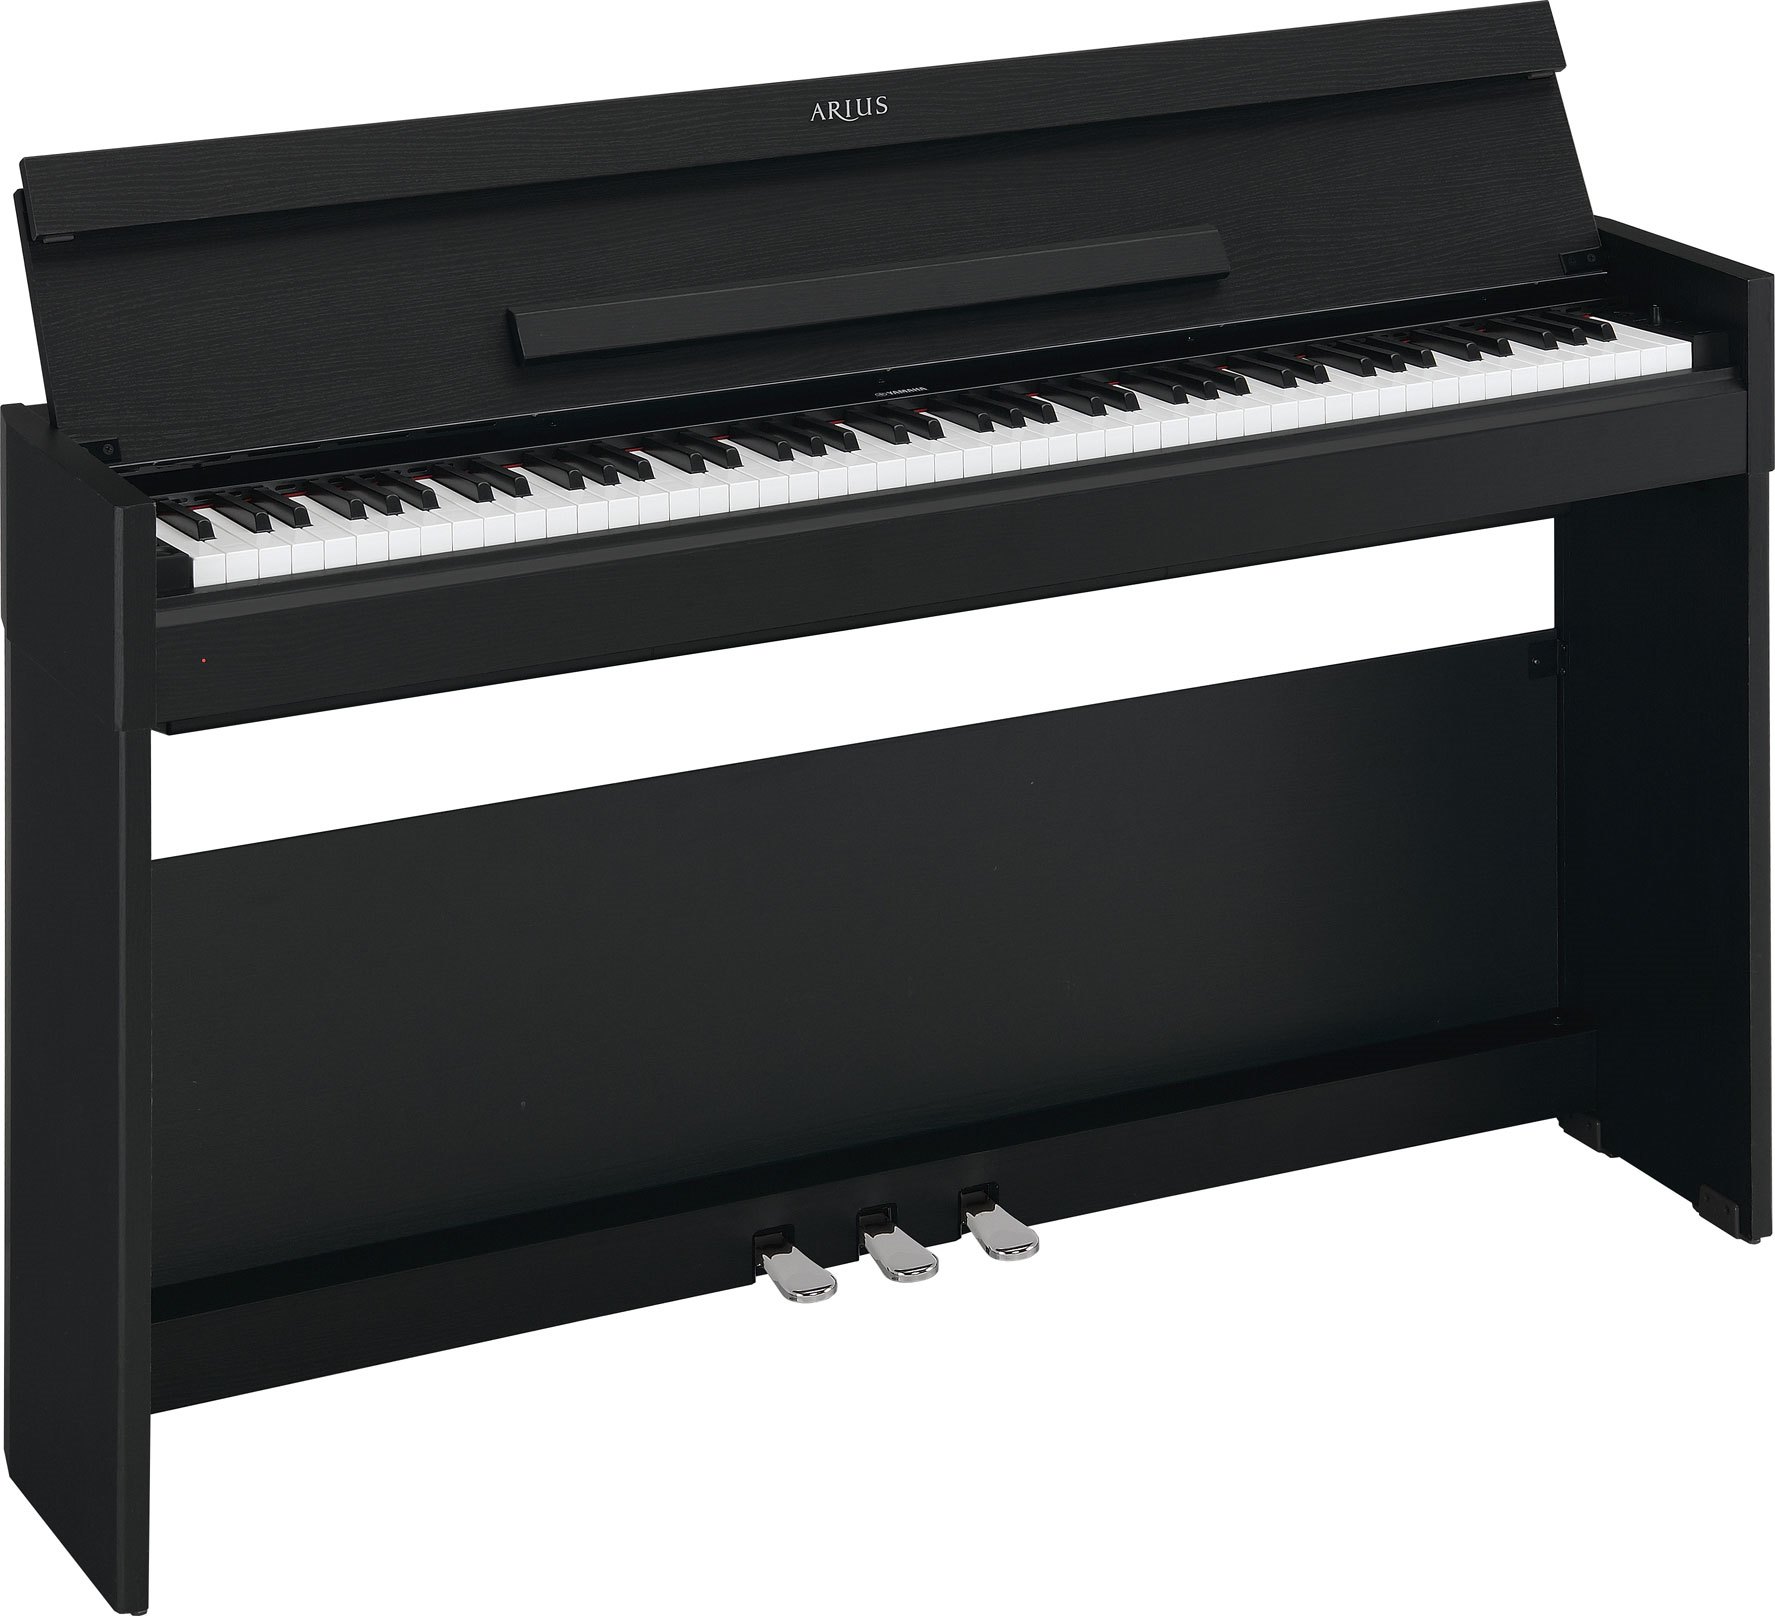 YDP-S51 - Specs - ARIUS - Pianos - Musical Instruments - Products ...